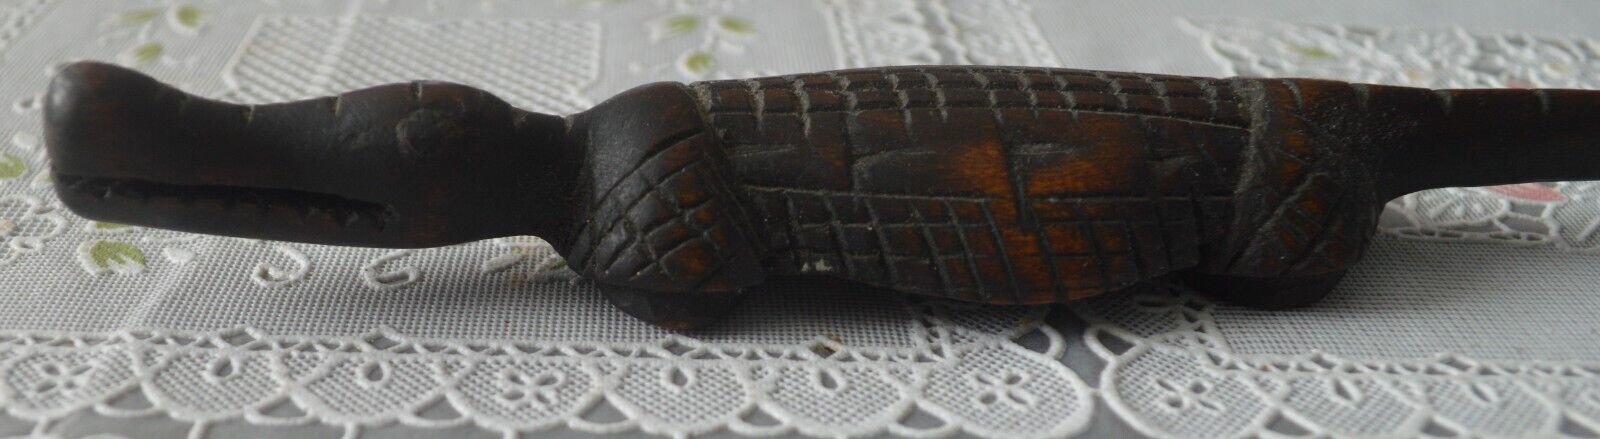 Primary image for Lovely Elongated Wooden Crocodile, Hand Made, 11.5” long